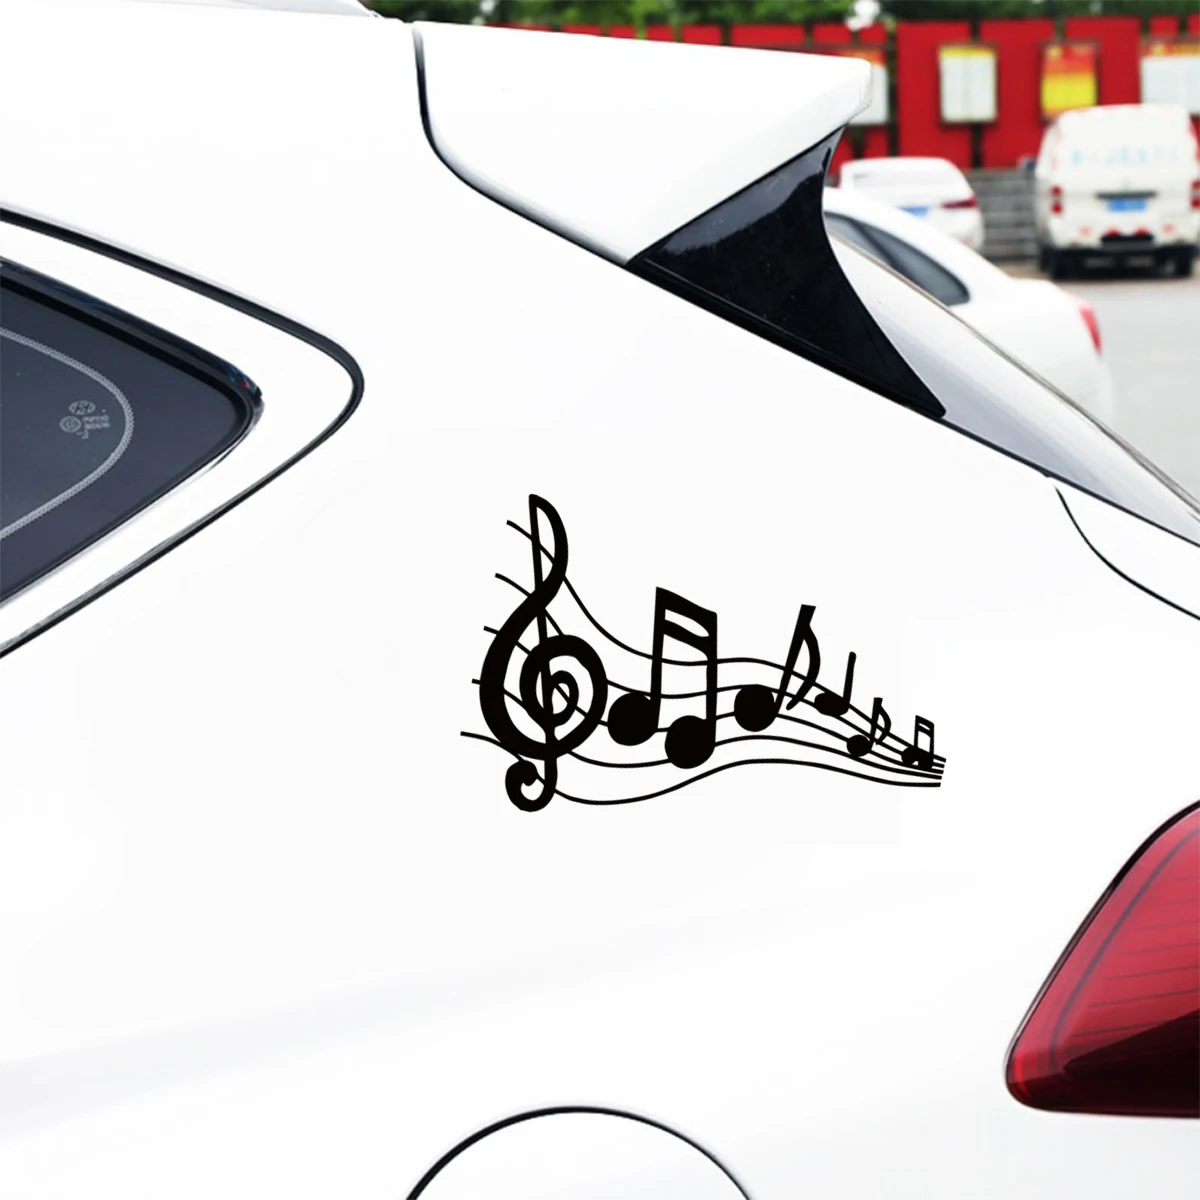 

Musical note Car Sticker Decal For Cars Auto Motorcycle Bumper Window Door Body JAYJOE Dropshipping Vinyl Music Car Stickers